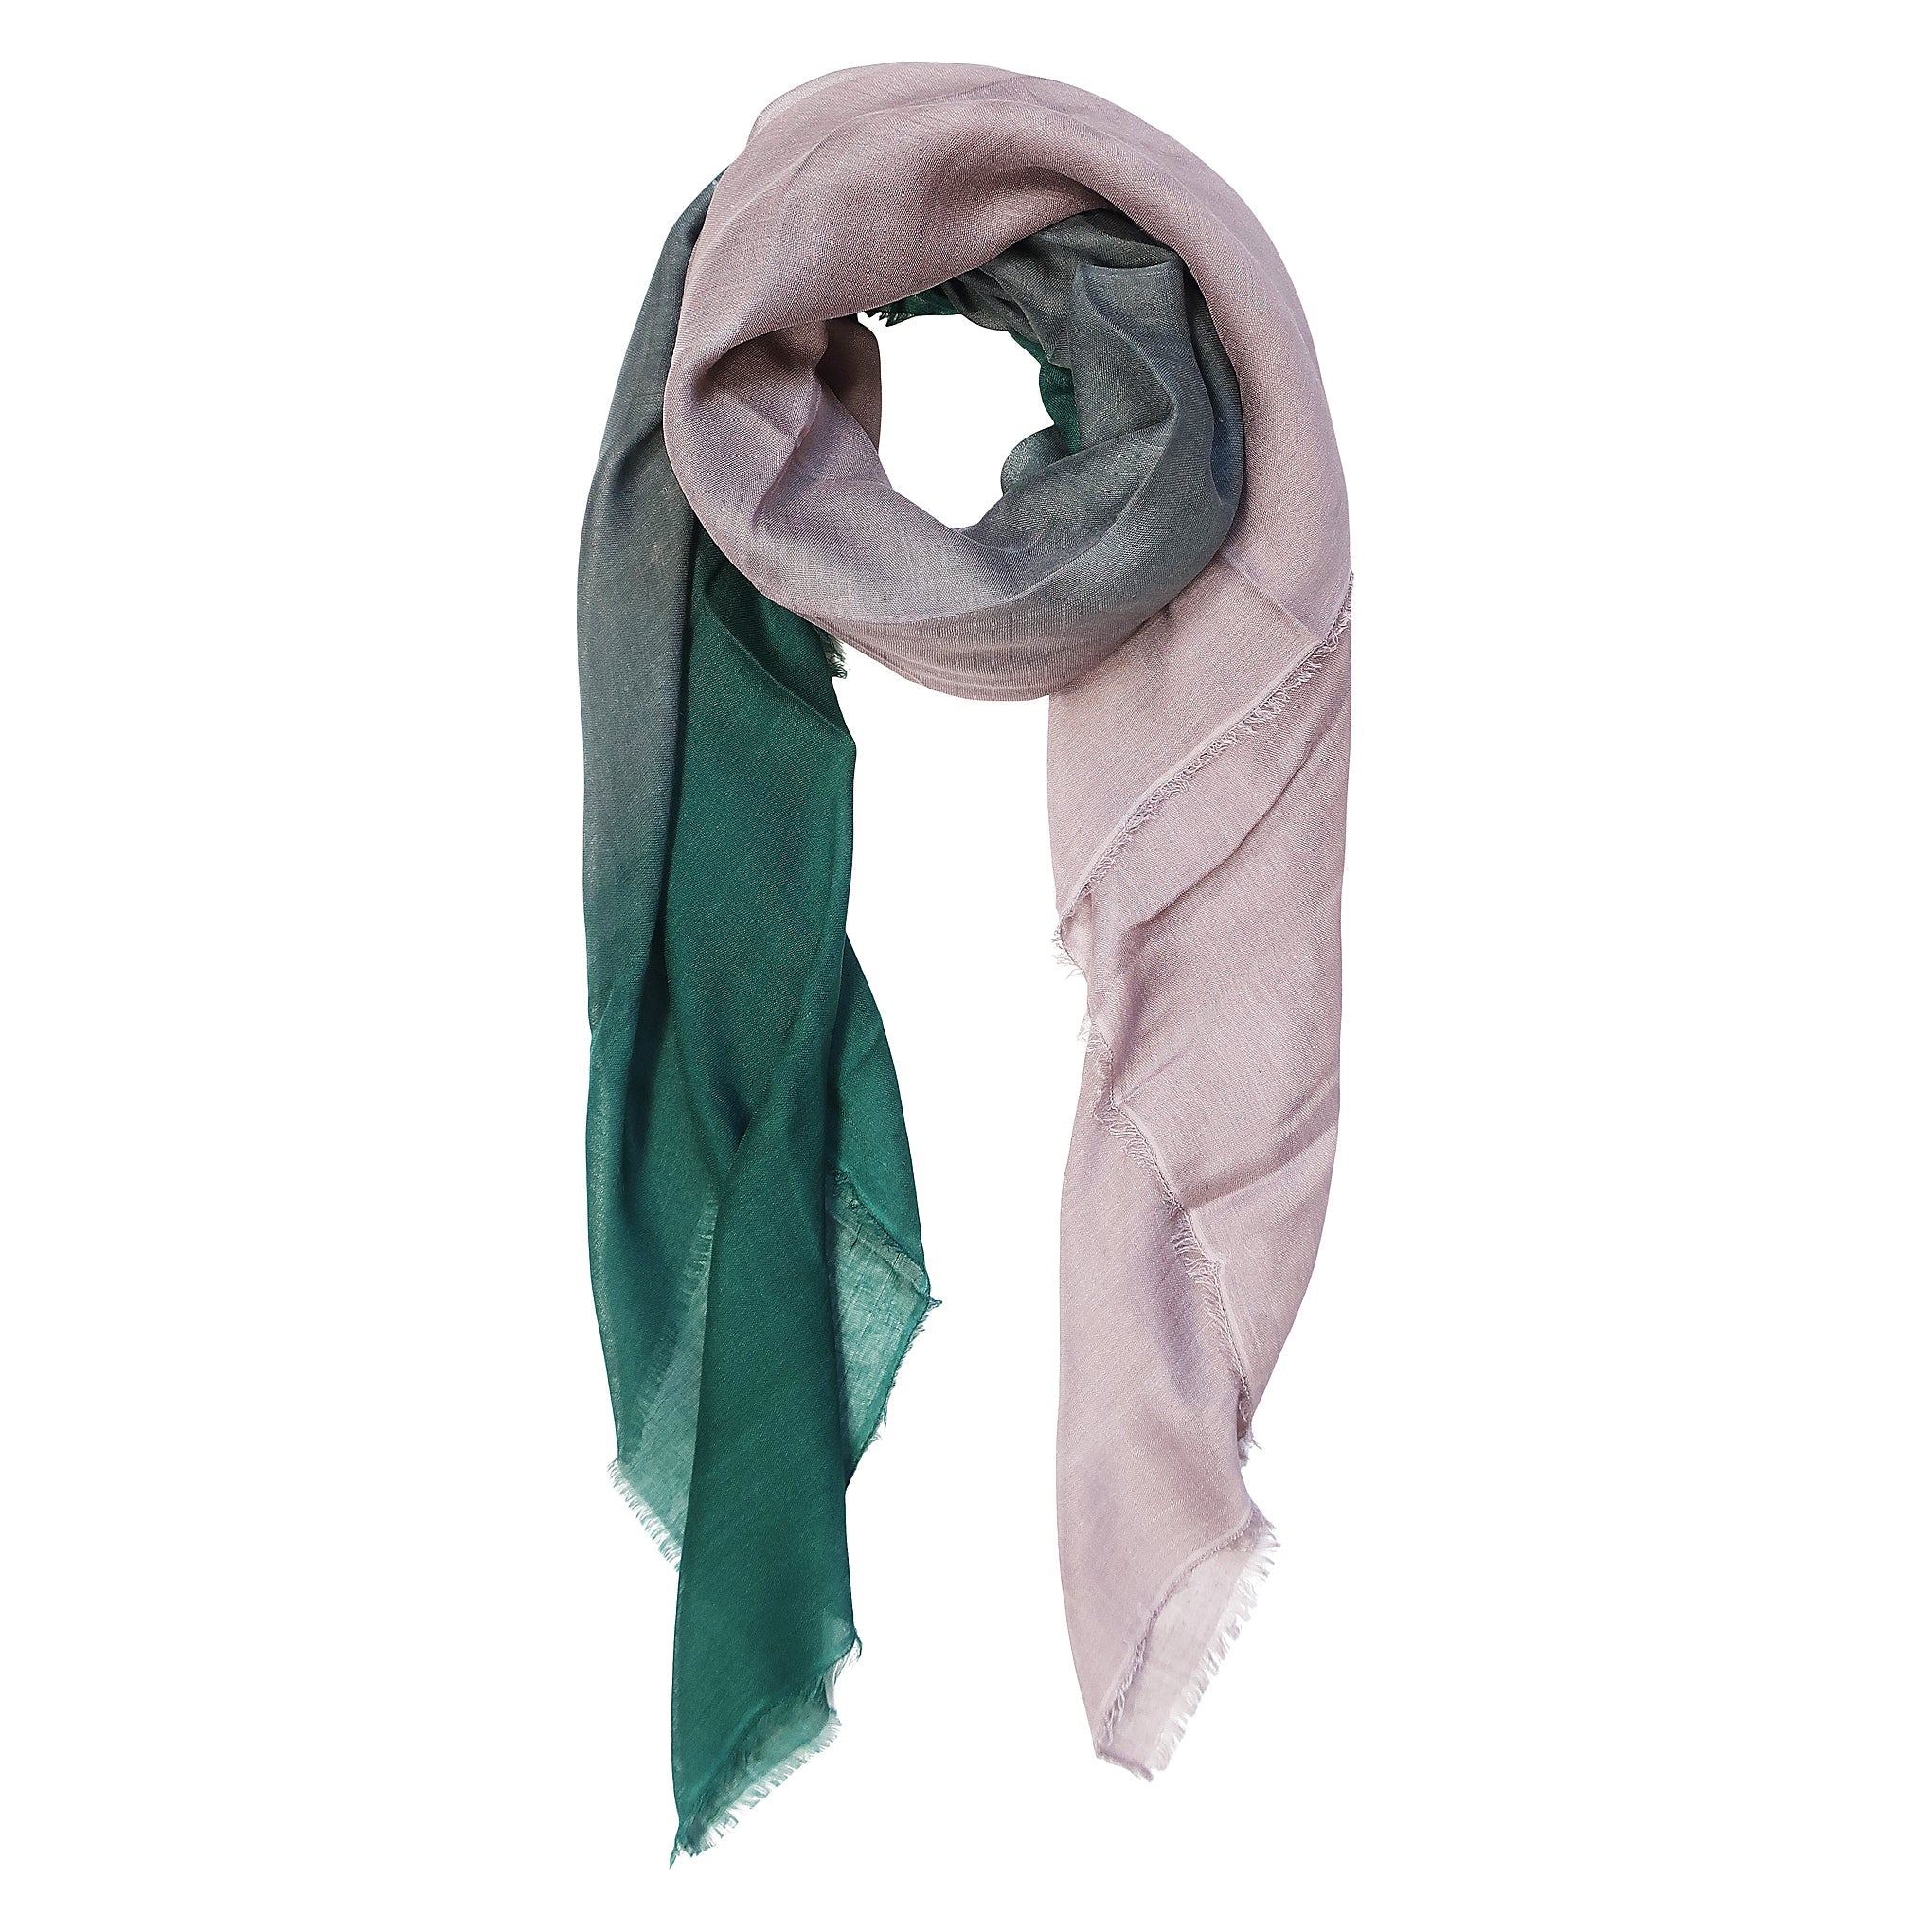 Blue Pacific Dream Cashmere and Silk Scarf in Teal, Slate, and Pink 47 x 37